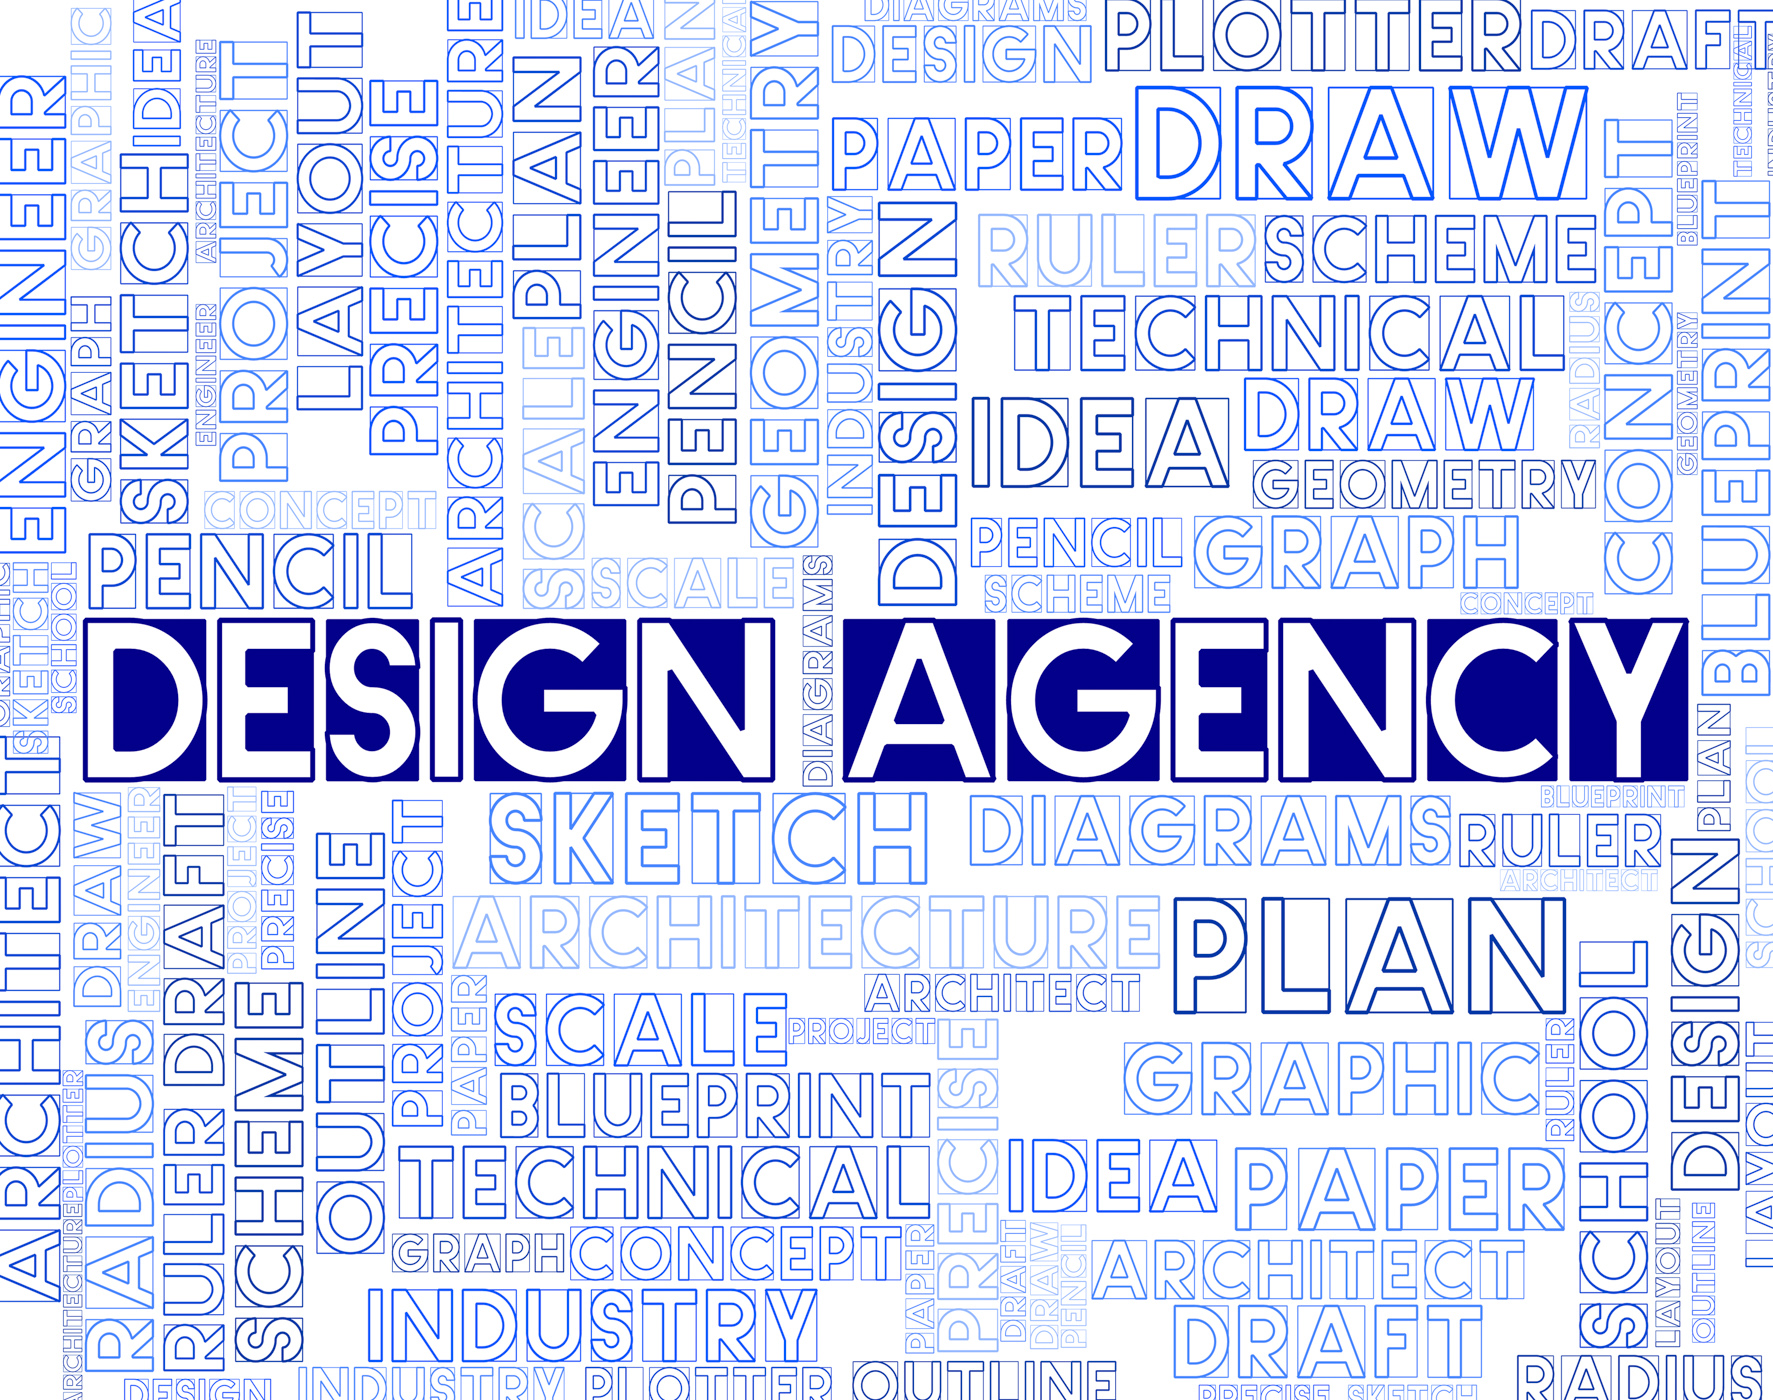 Design agency means artwork and creative agents photo